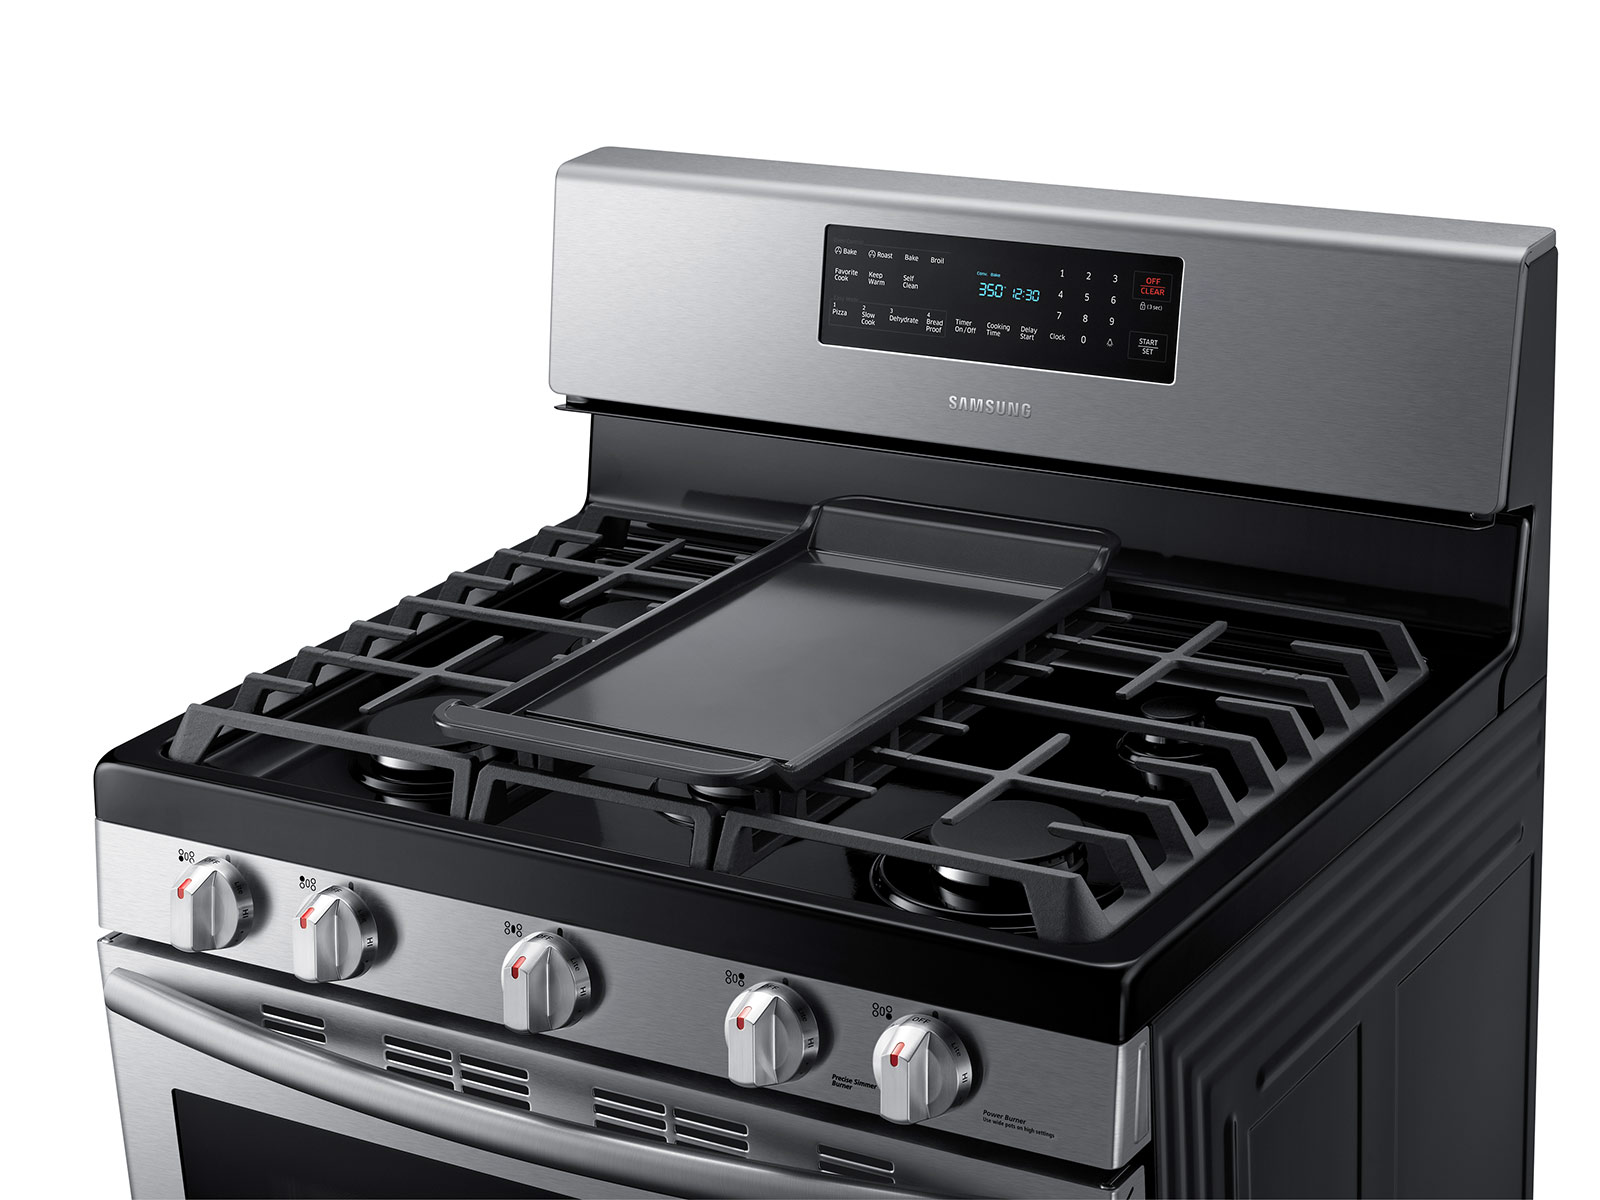 Buy 4 burner gas stove auto Online in Ireland at Low Prices at